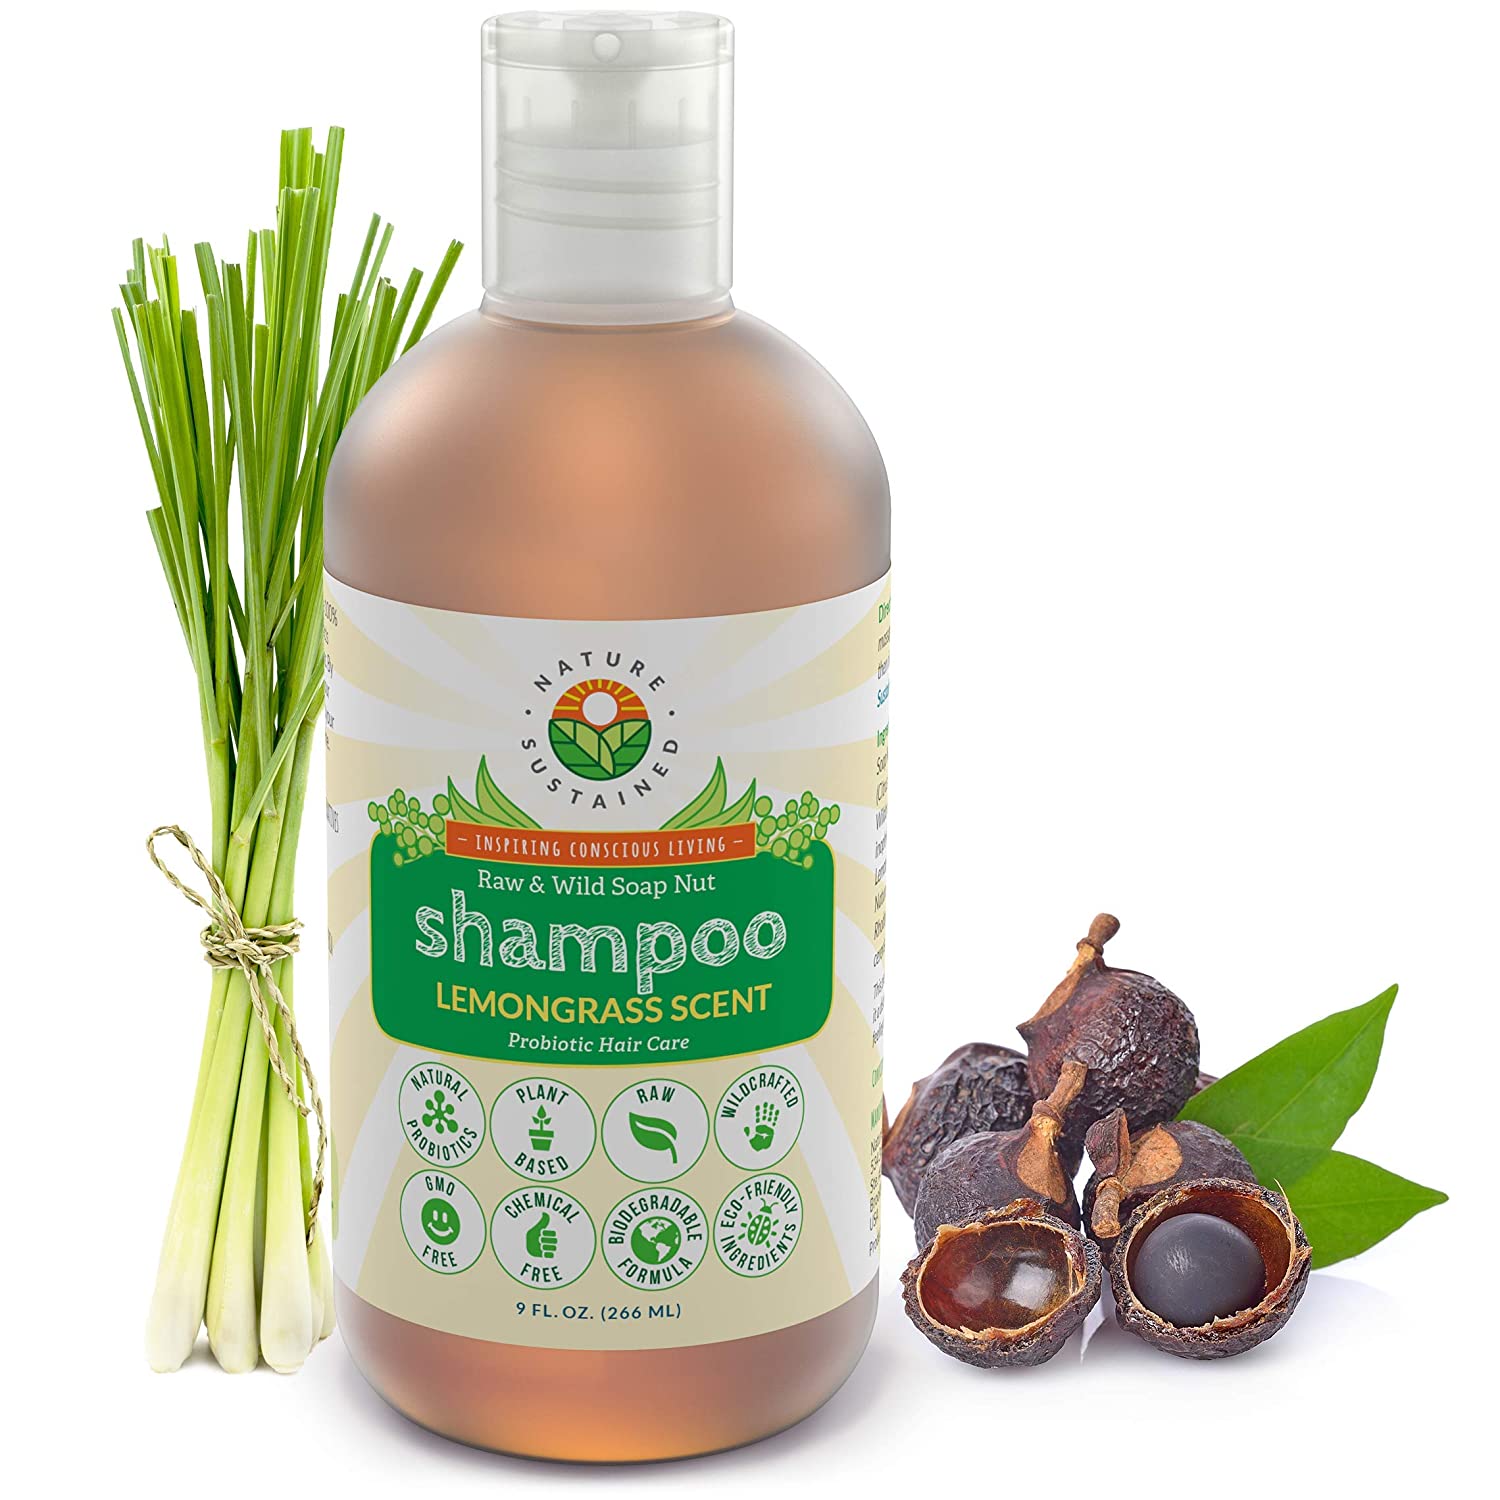 Nature Sustained Organic Shampoo - Hypoallergenic, Chemical-Free, Natural & Sulfate Free Shampoo for Sensitive Scalp, Dry Hair, Dandruff, Eczema